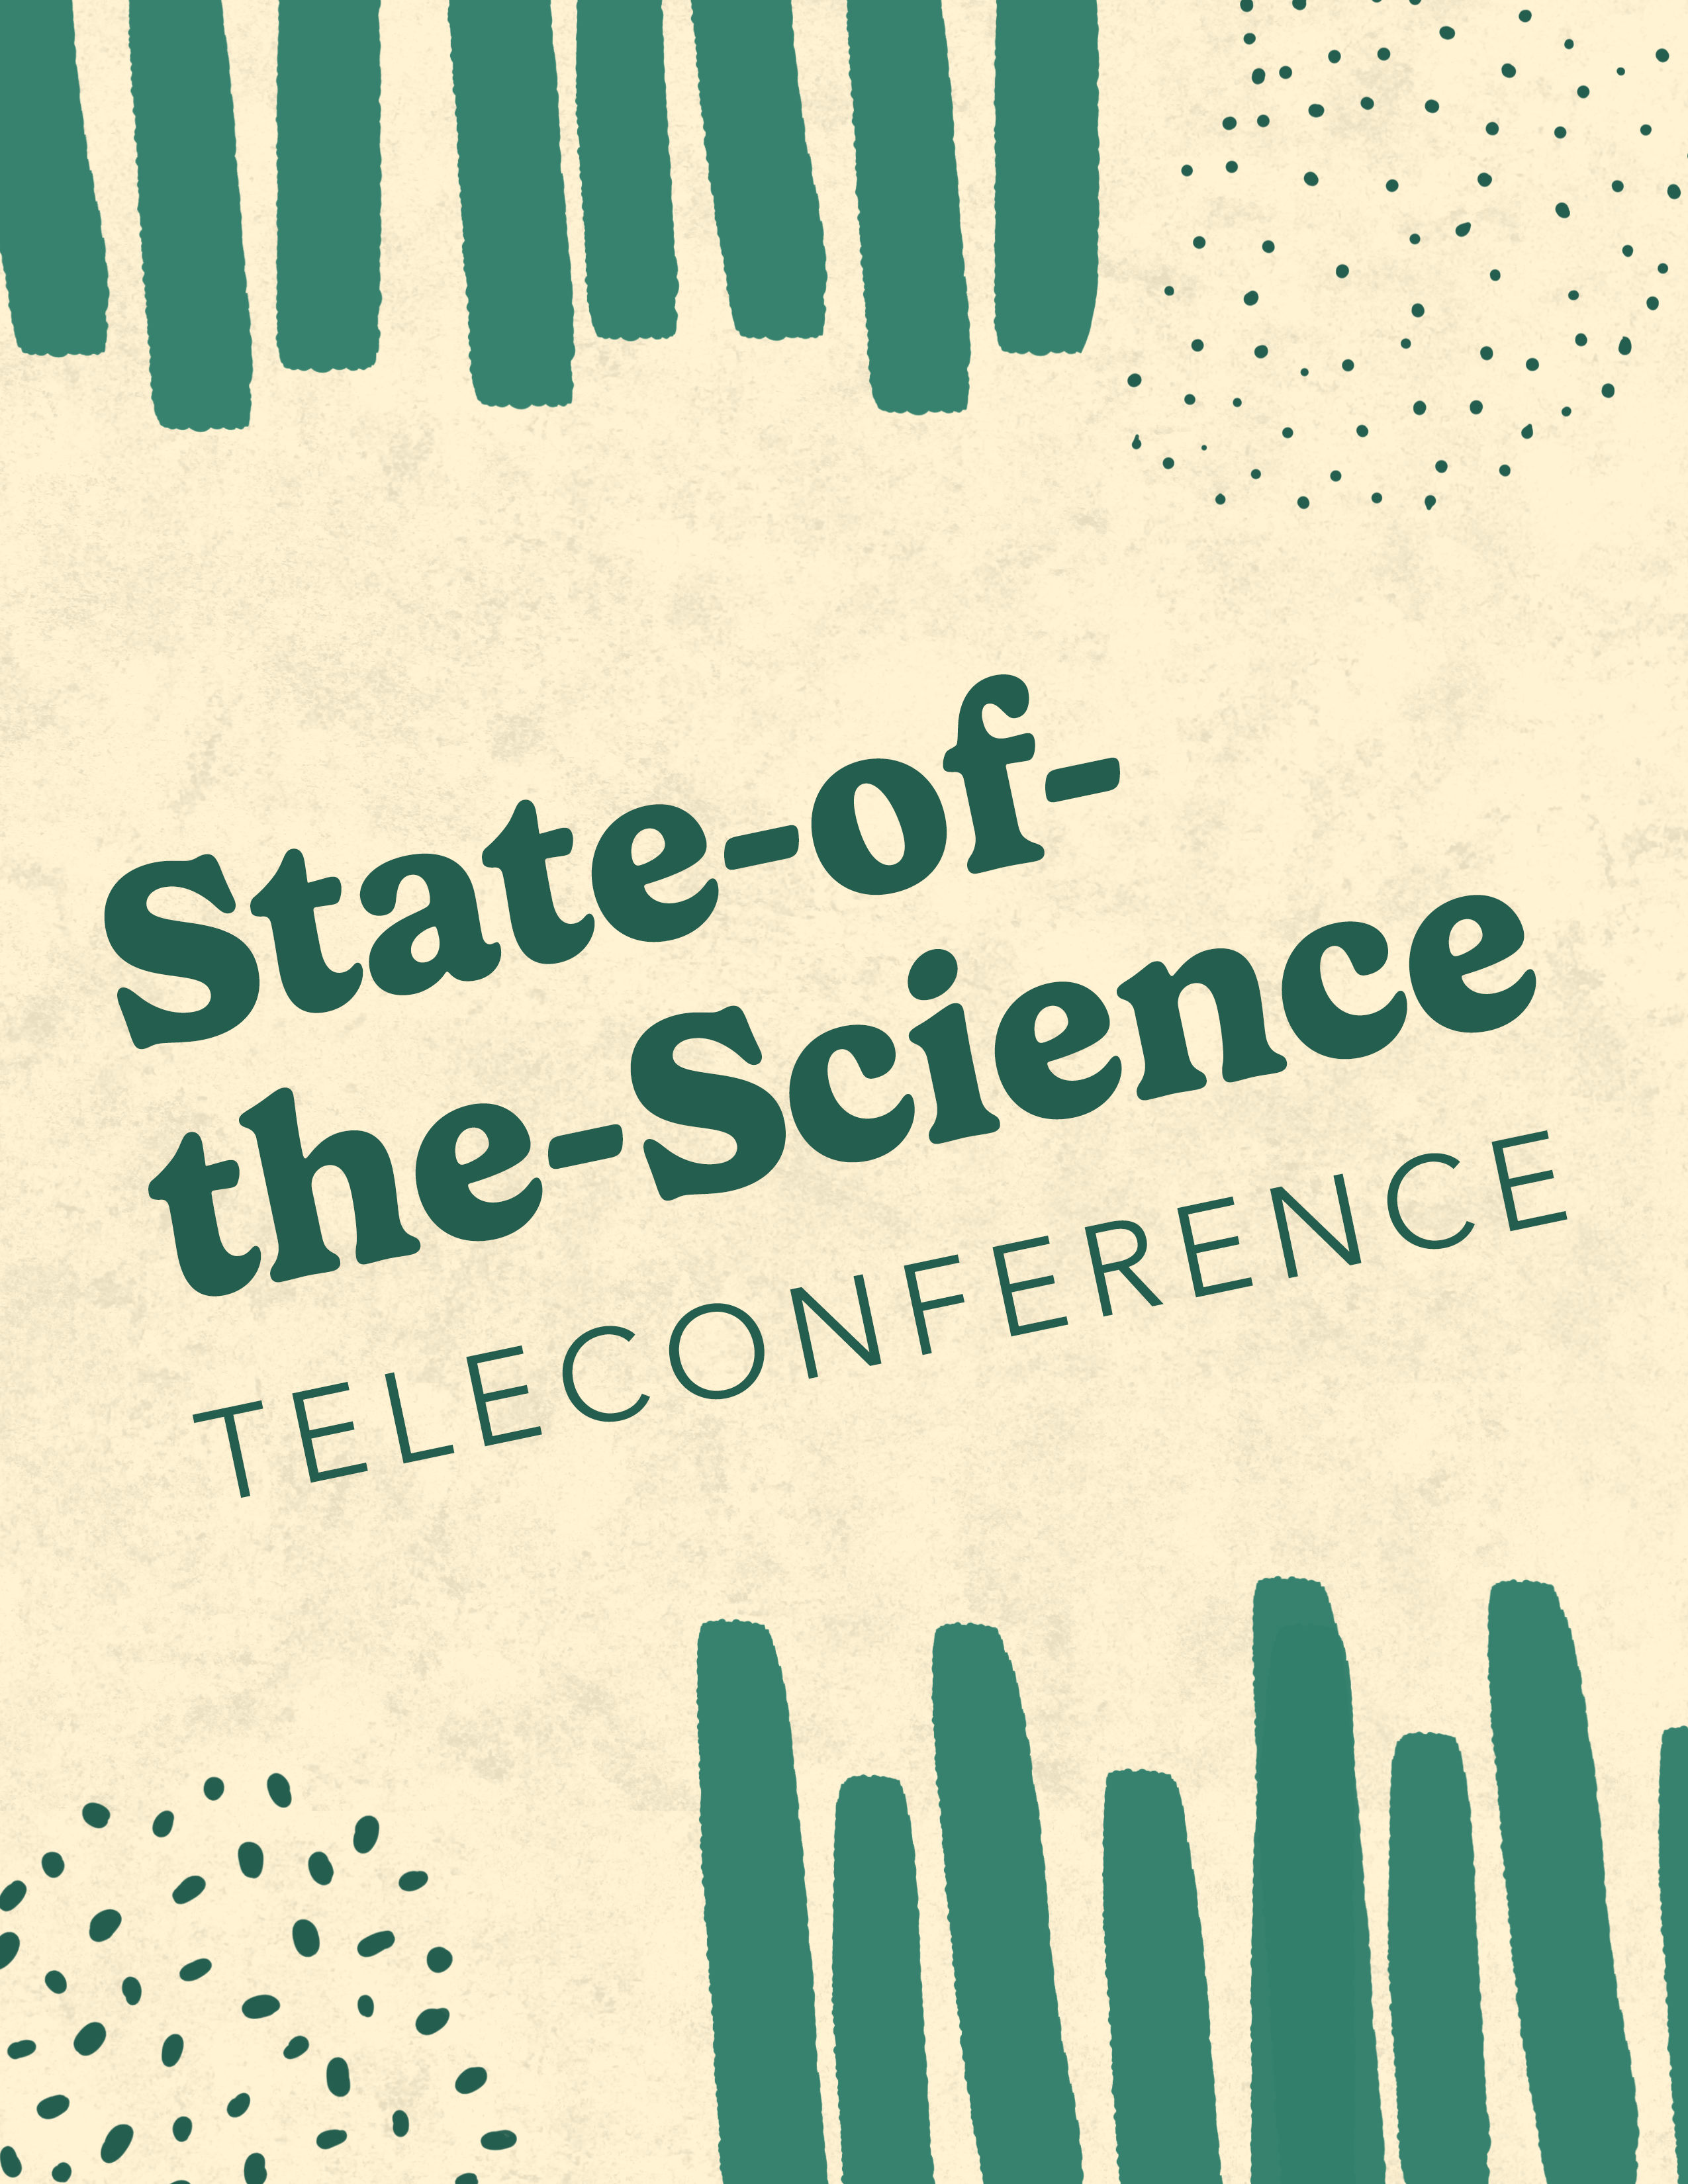 State-of-the-Science Teleconference